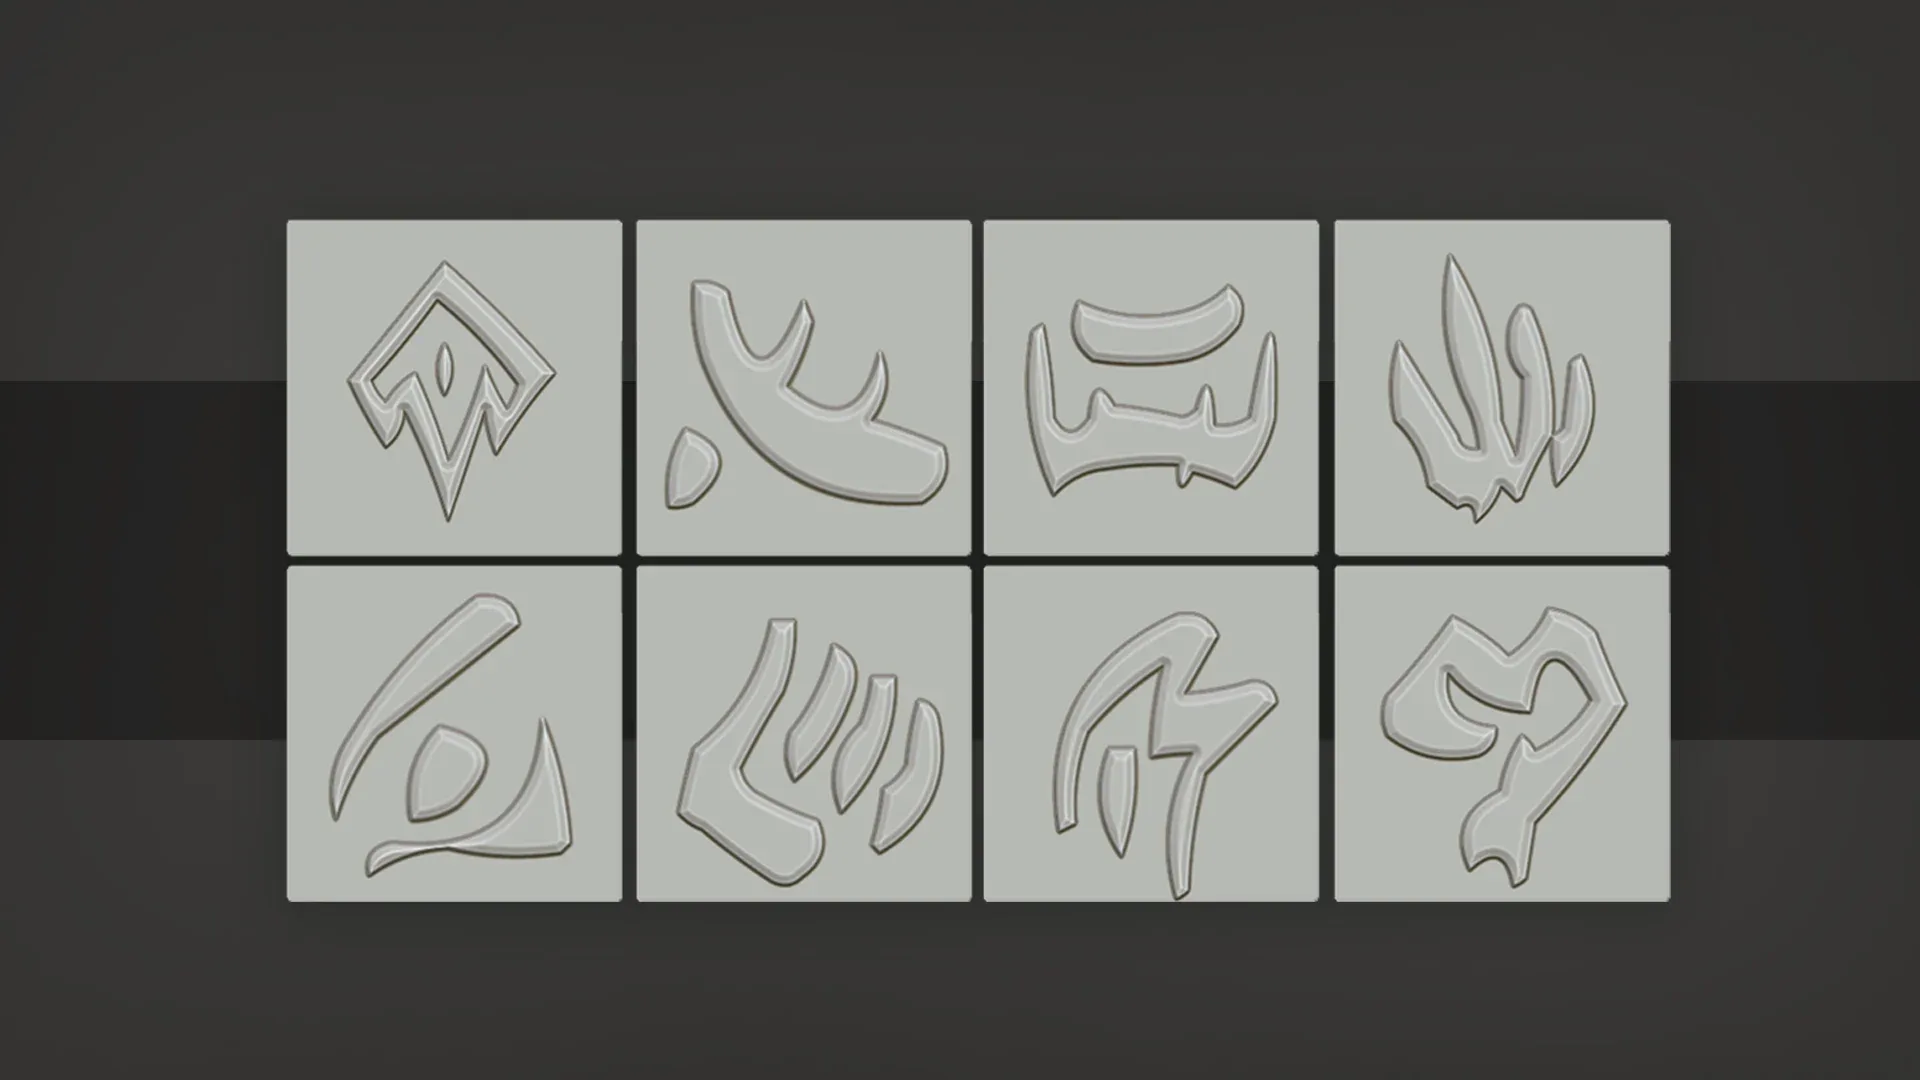 Stylized alphas of runes and the orc language